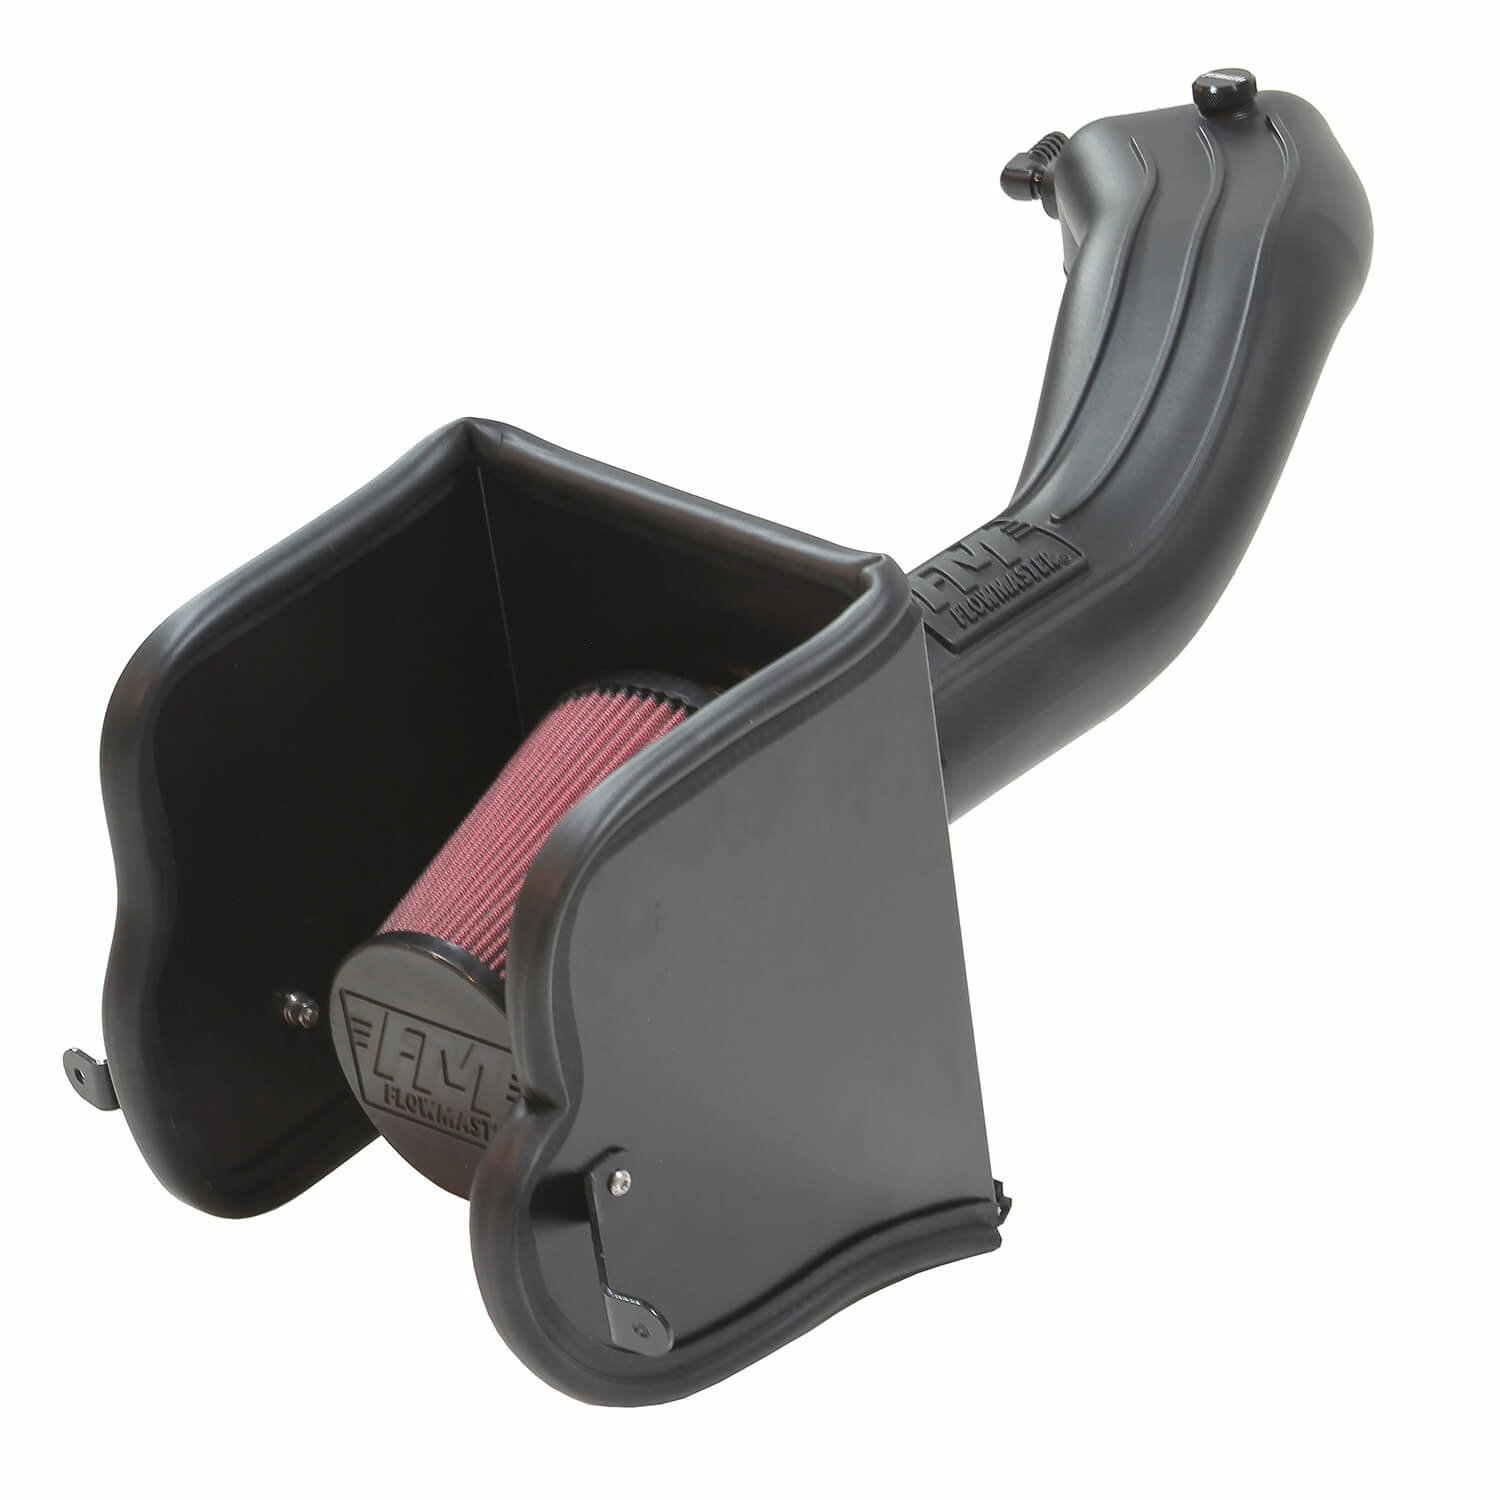 Delta Force Cold Air Intake System for Select 1994-2002 Dodge Ram 1500/2500/3500 Trucks with 5.2L/5.9L Engines